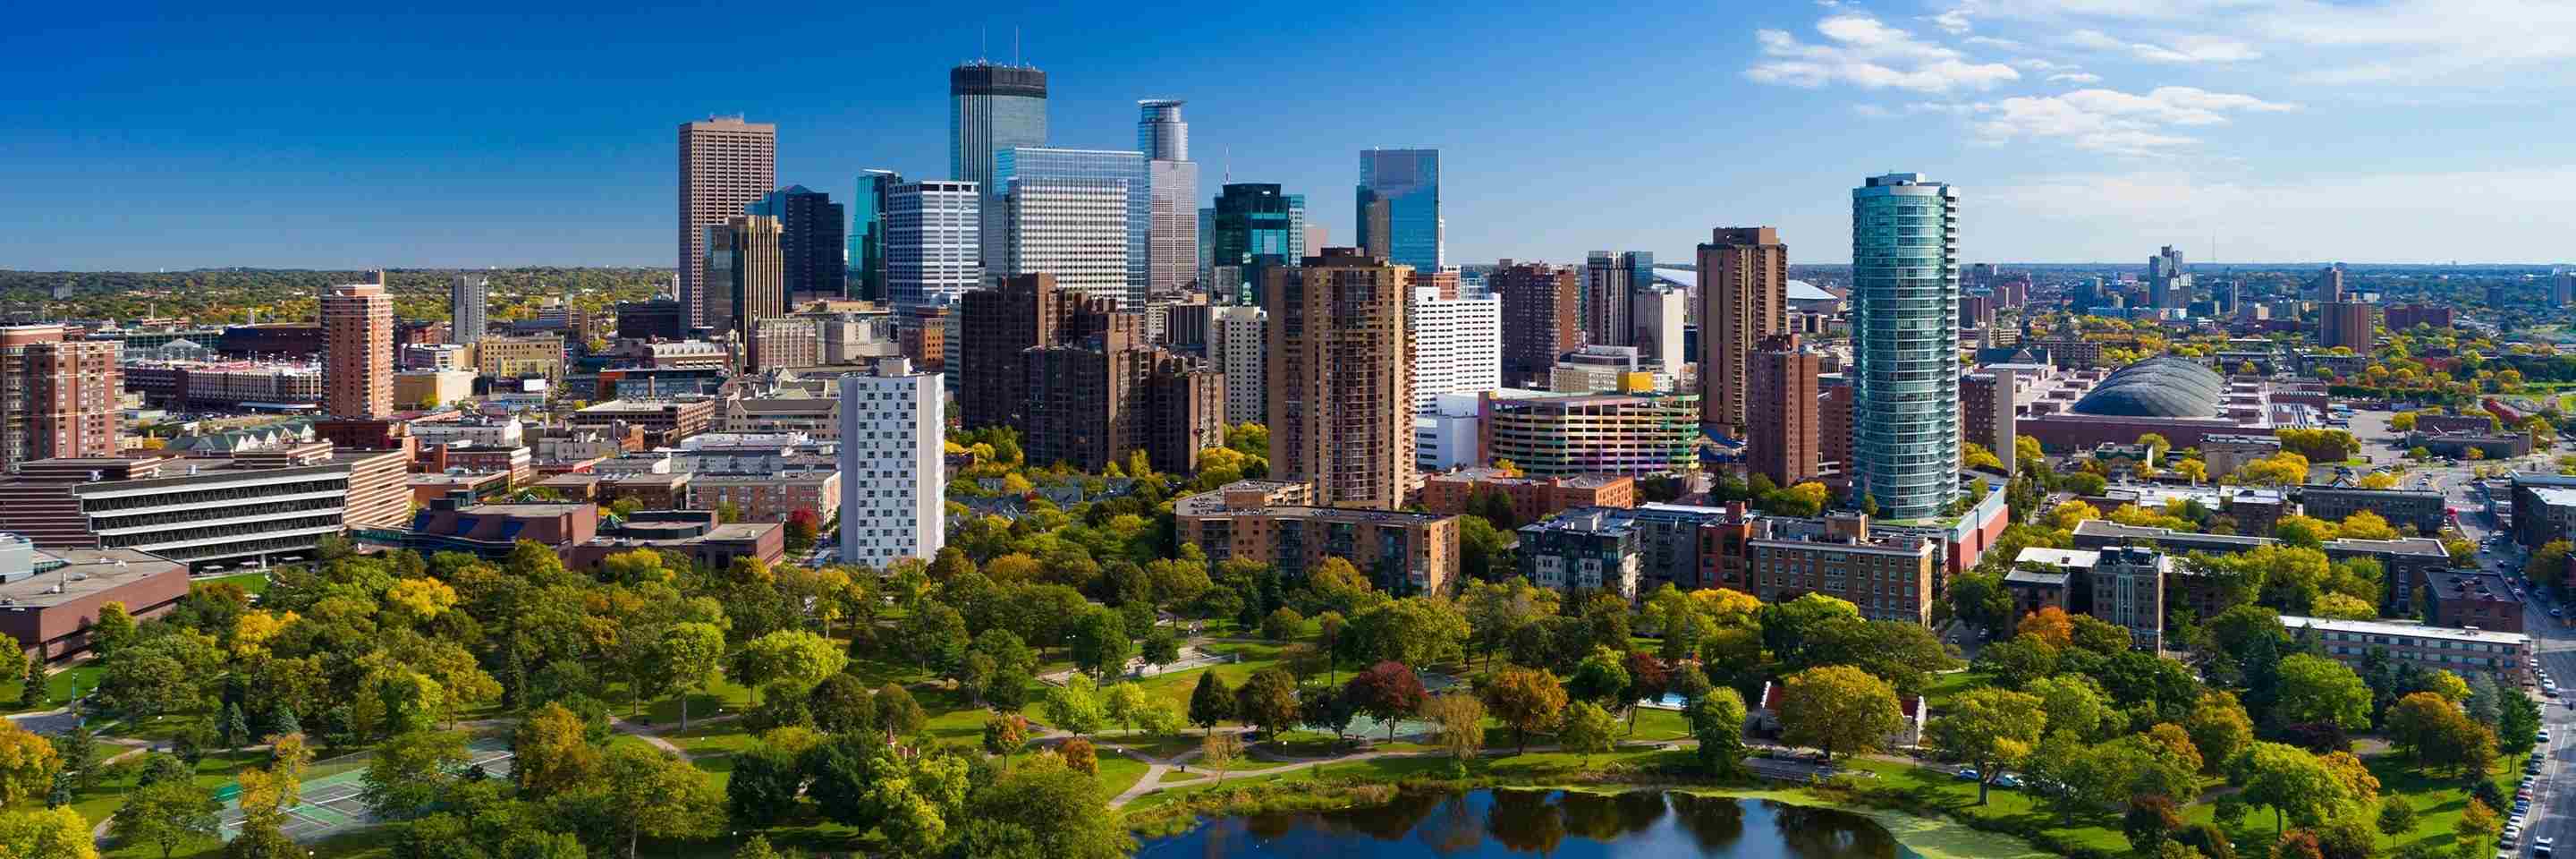 Book Cheap Flights To Minneapolis With Aer Lingus